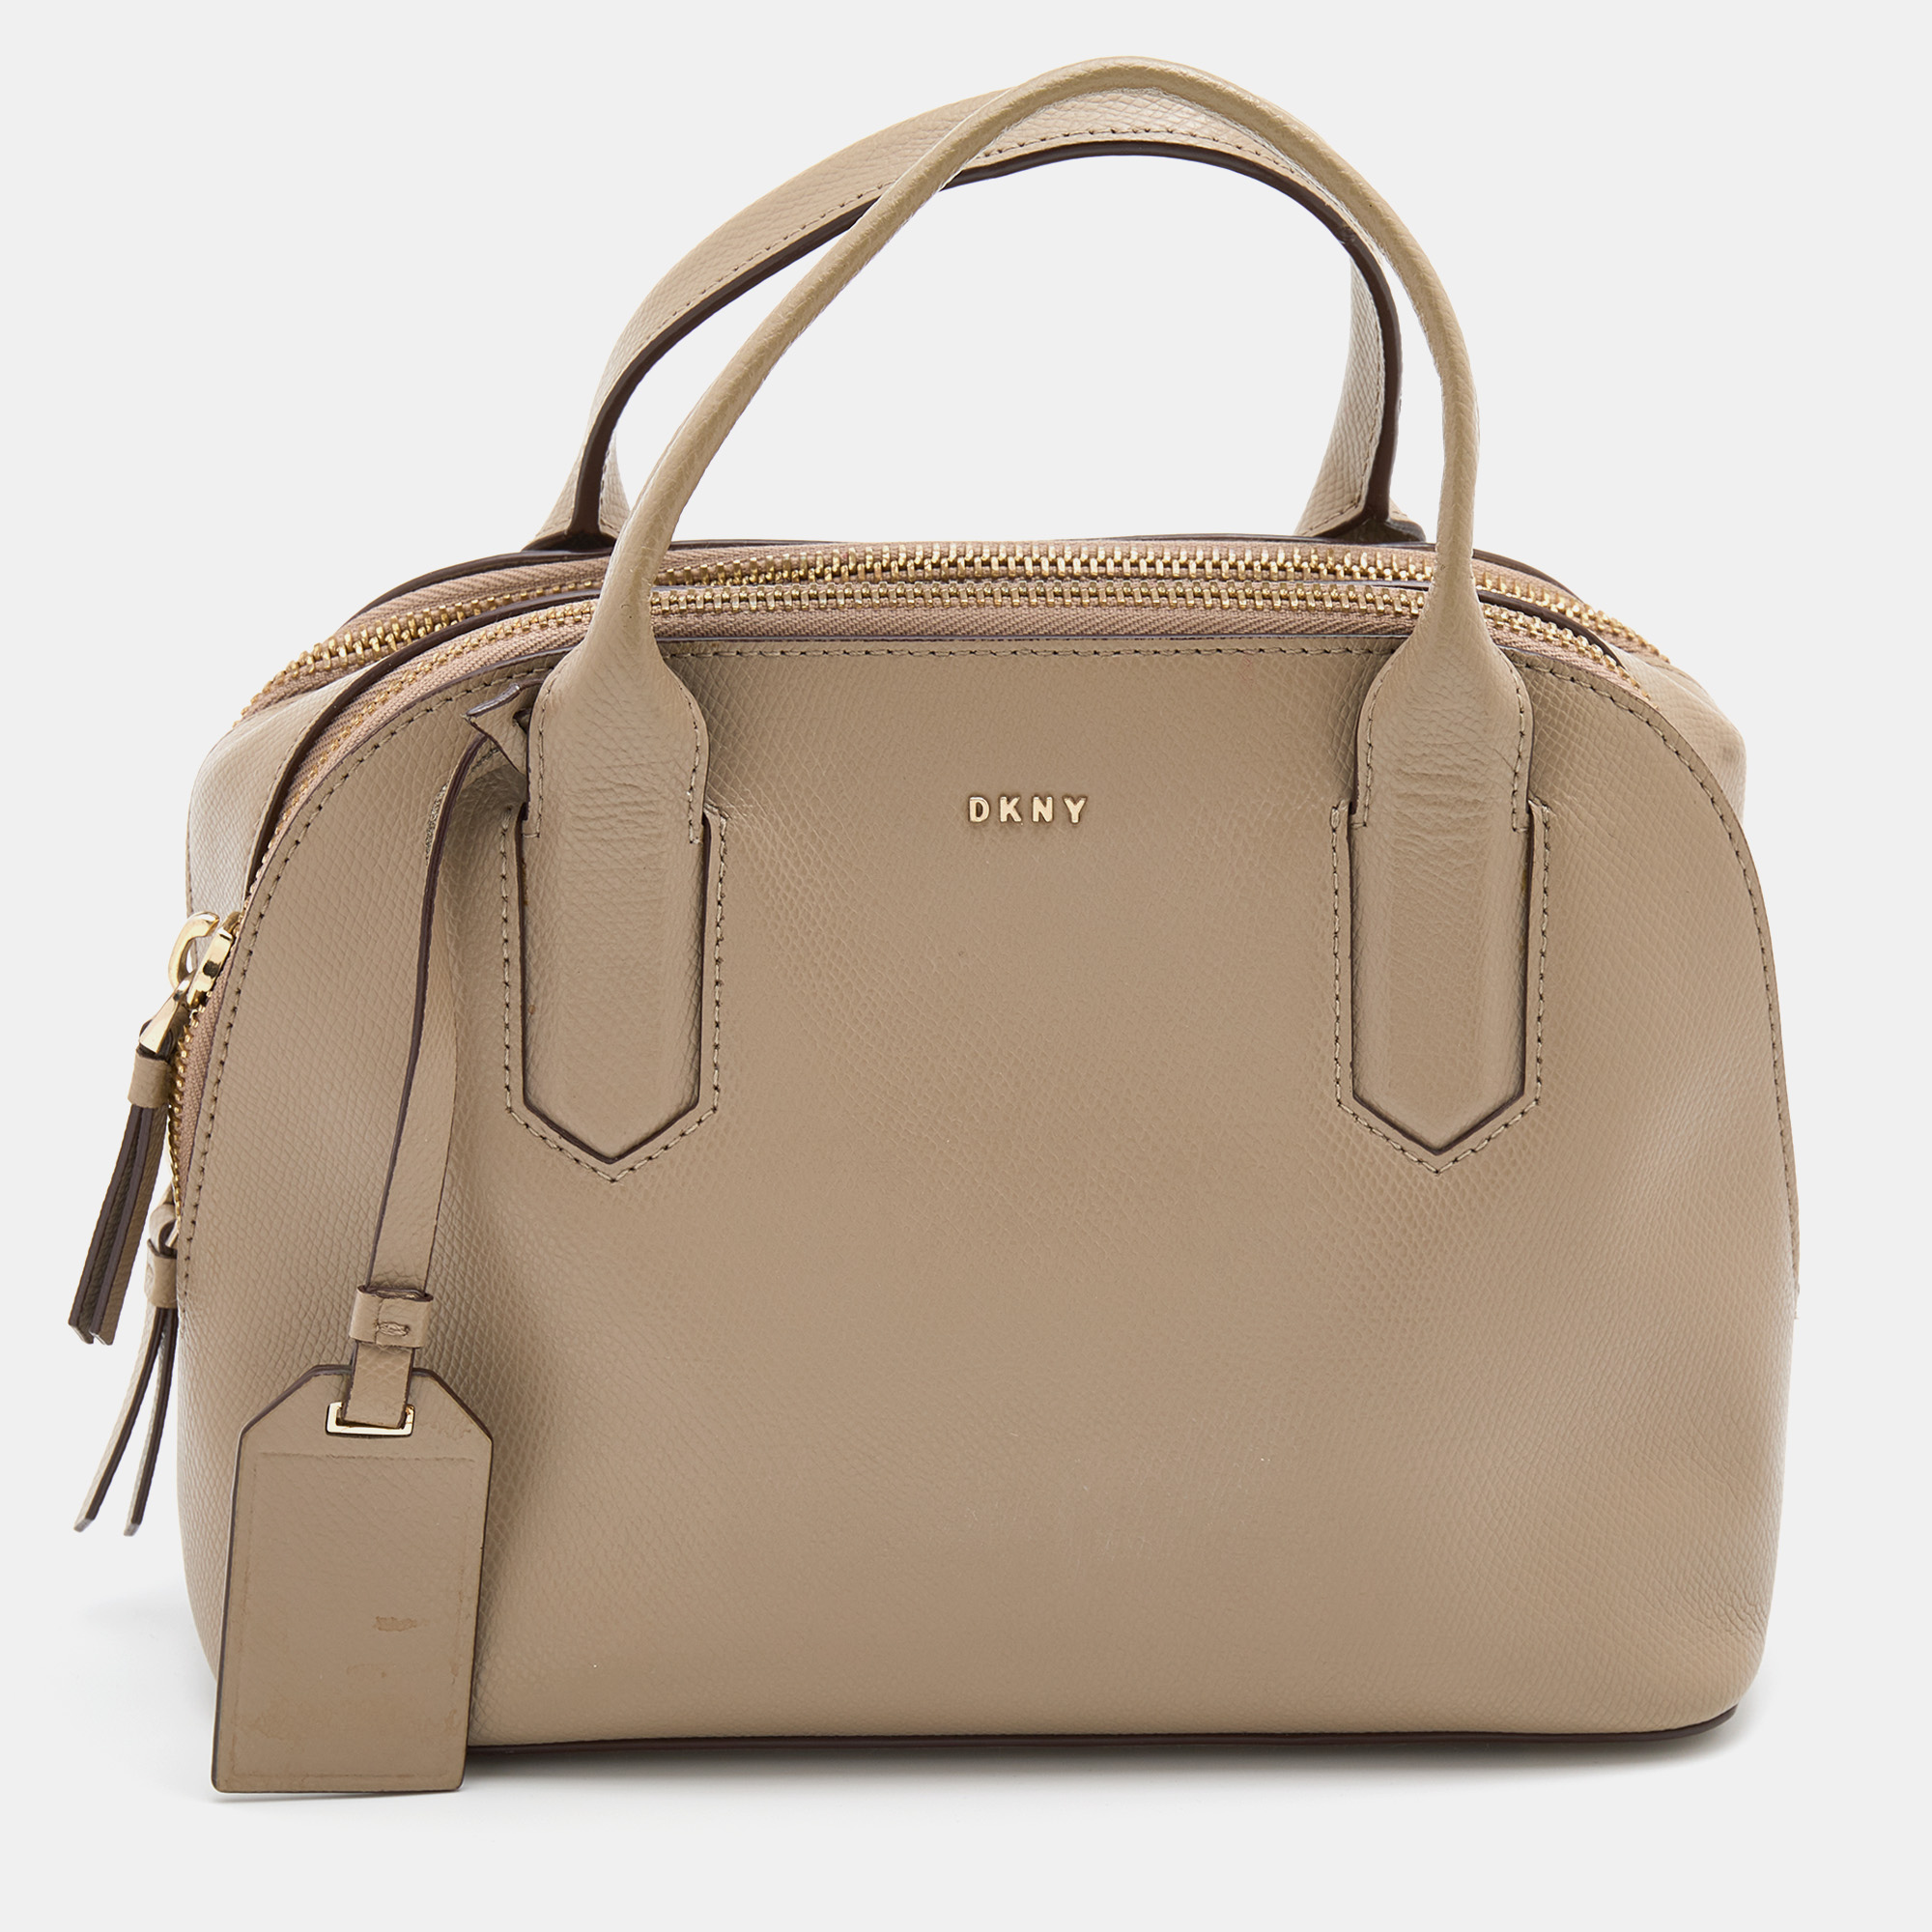 Pre-owned Dkny Beige Leather Dome Satchel